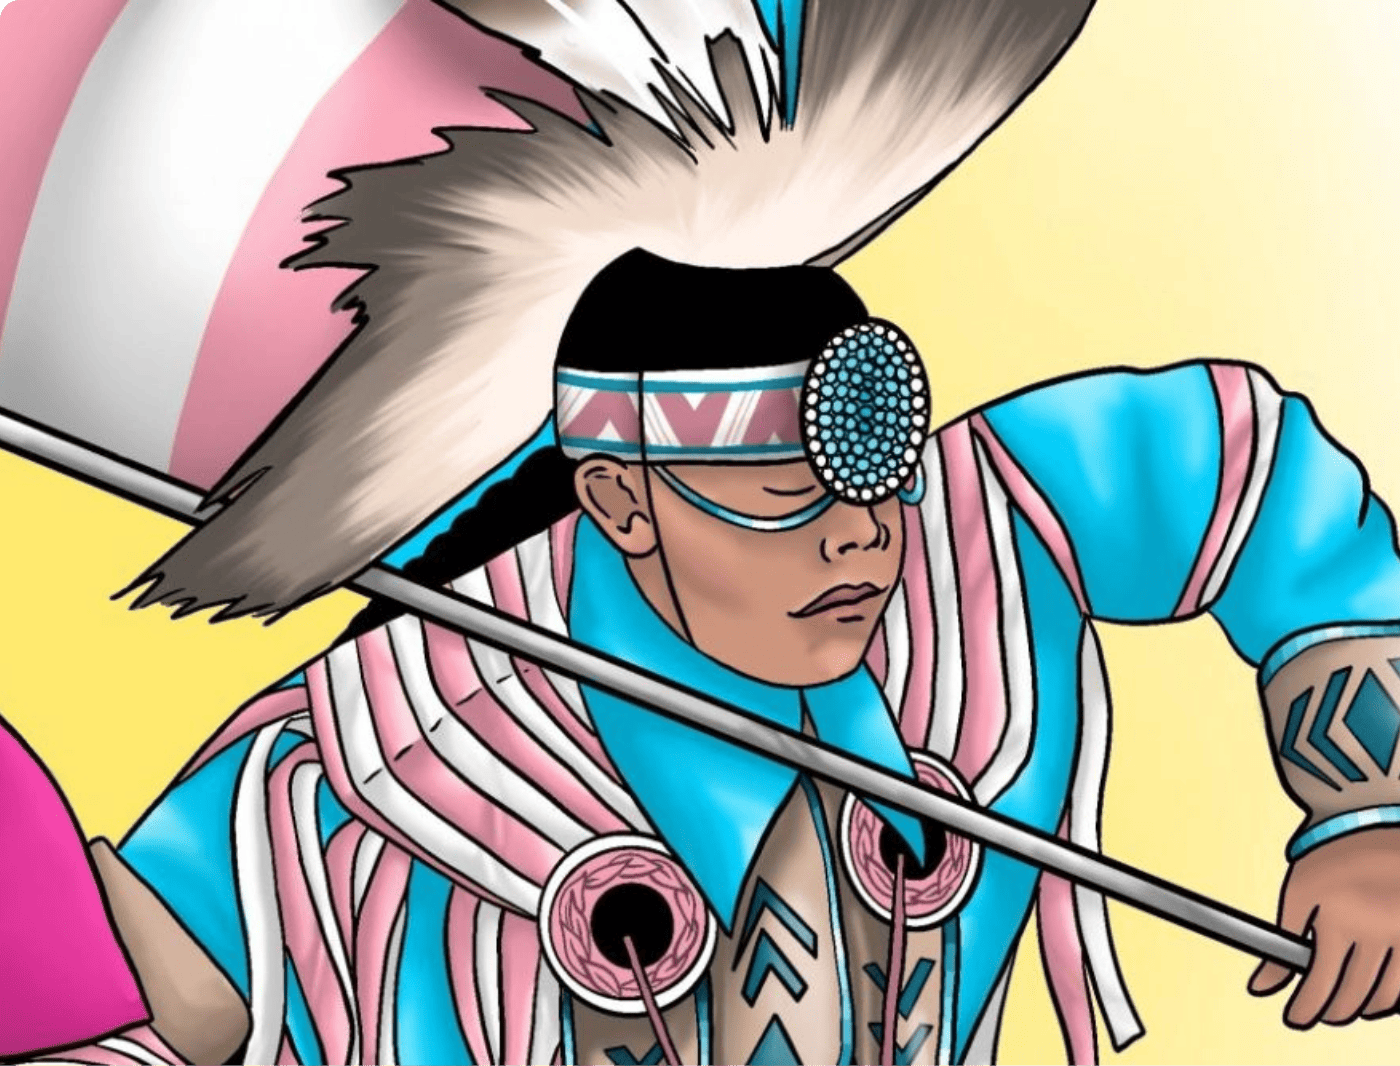 Illustration of two First Nations powwow dancers, one dancer holds the Trans flag